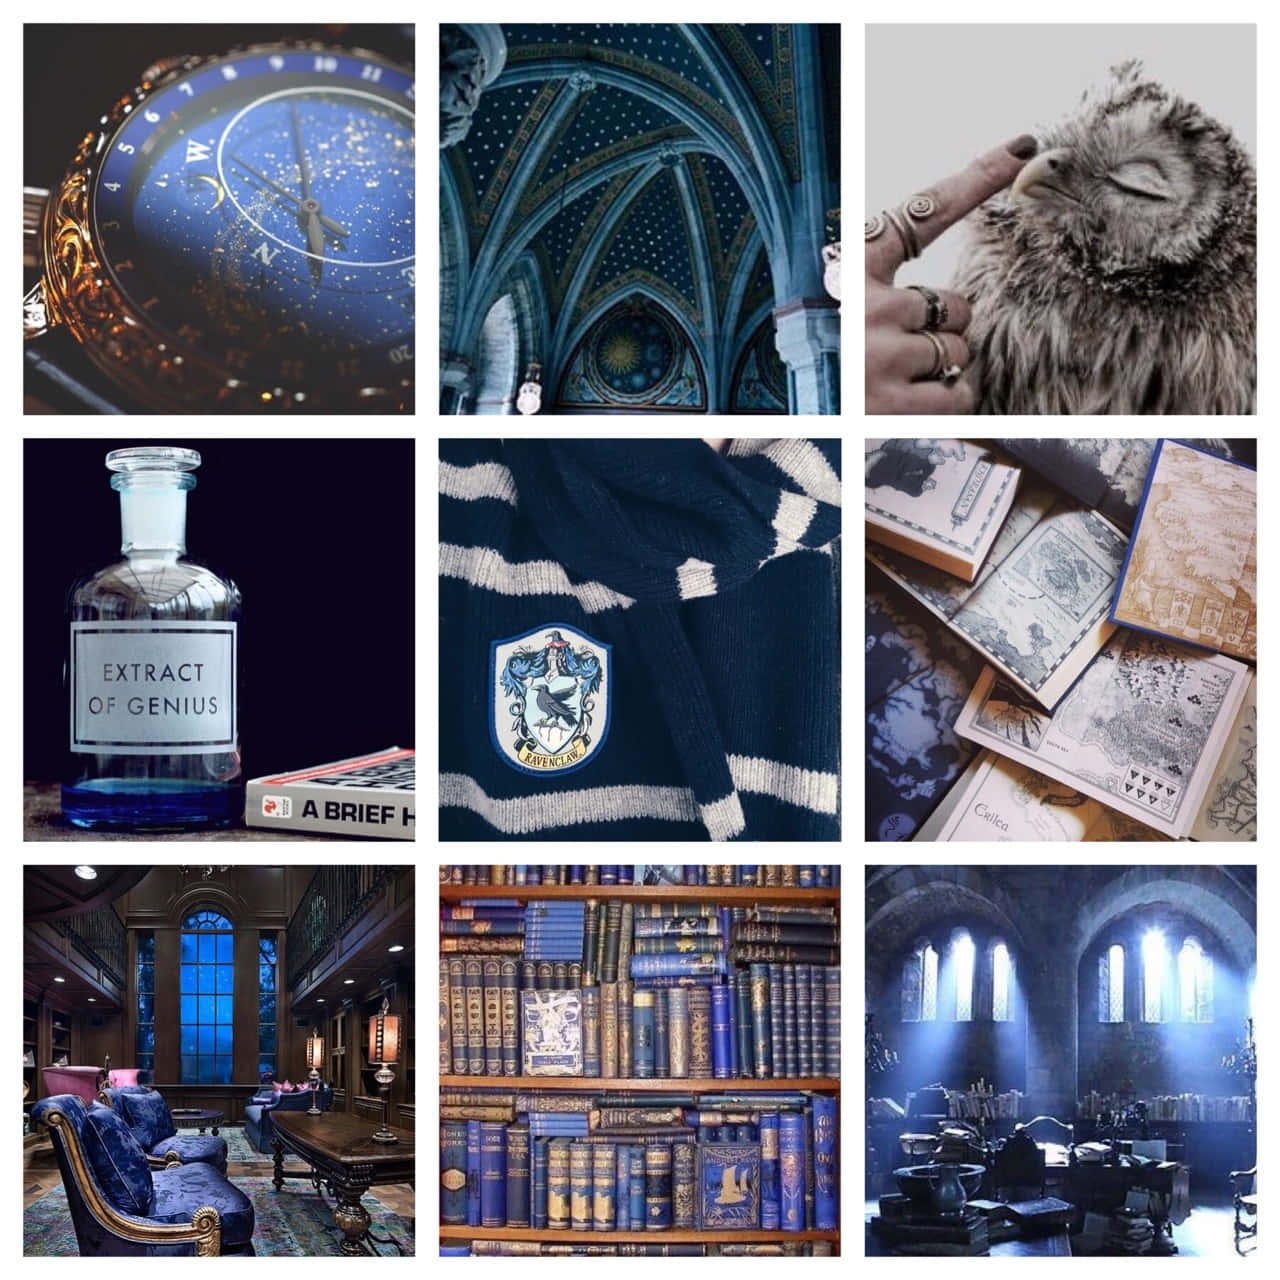 "The Sorcerer's Stone - An Aesthetic Harry Potter Journey Begins"